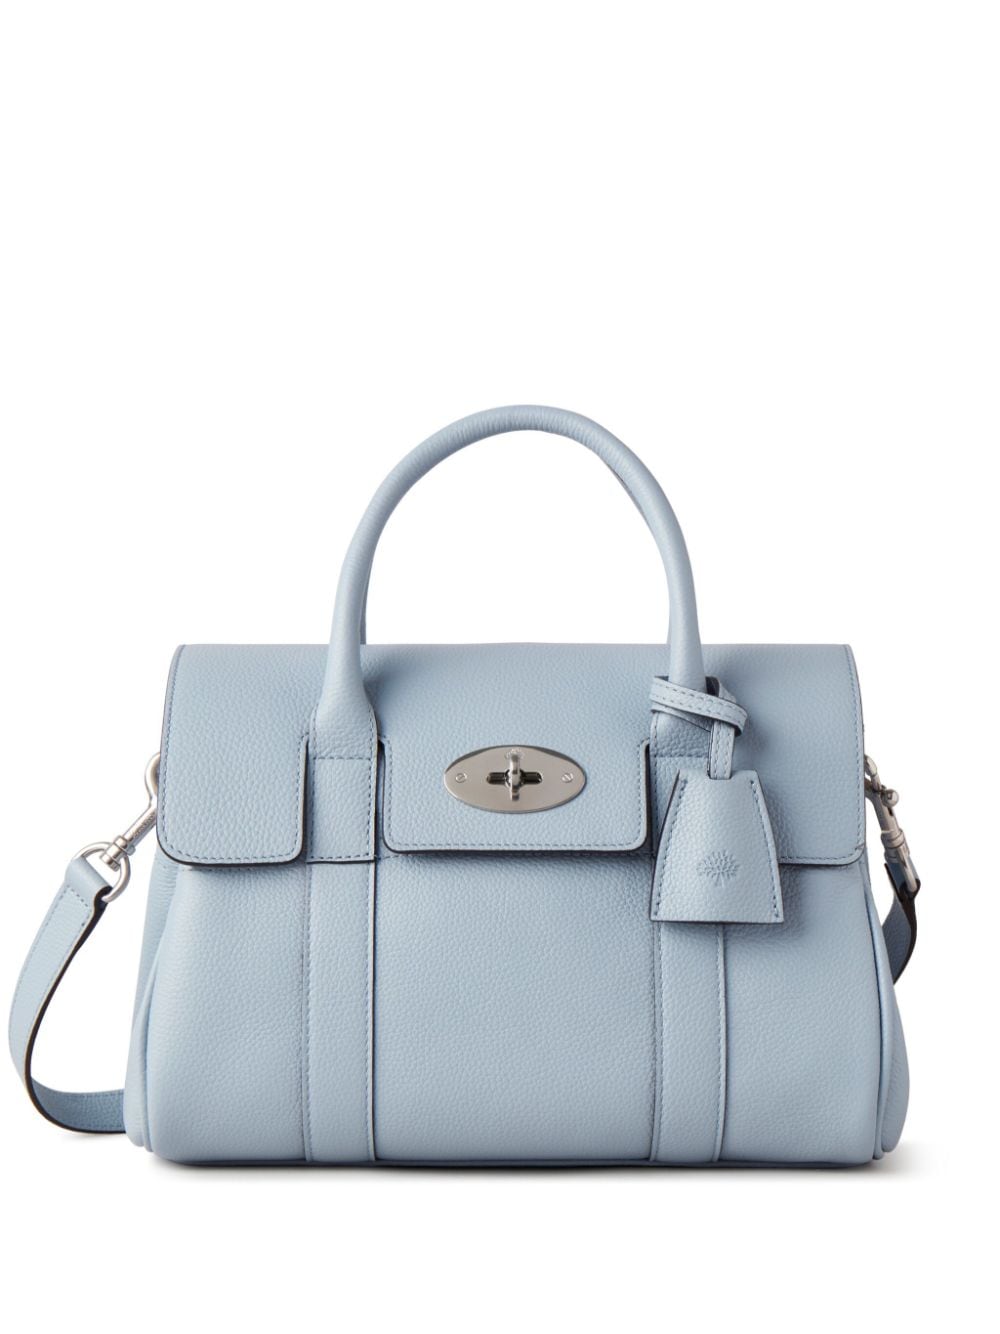 Mulberry small Bayswater leather tote bag - Blue von Mulberry